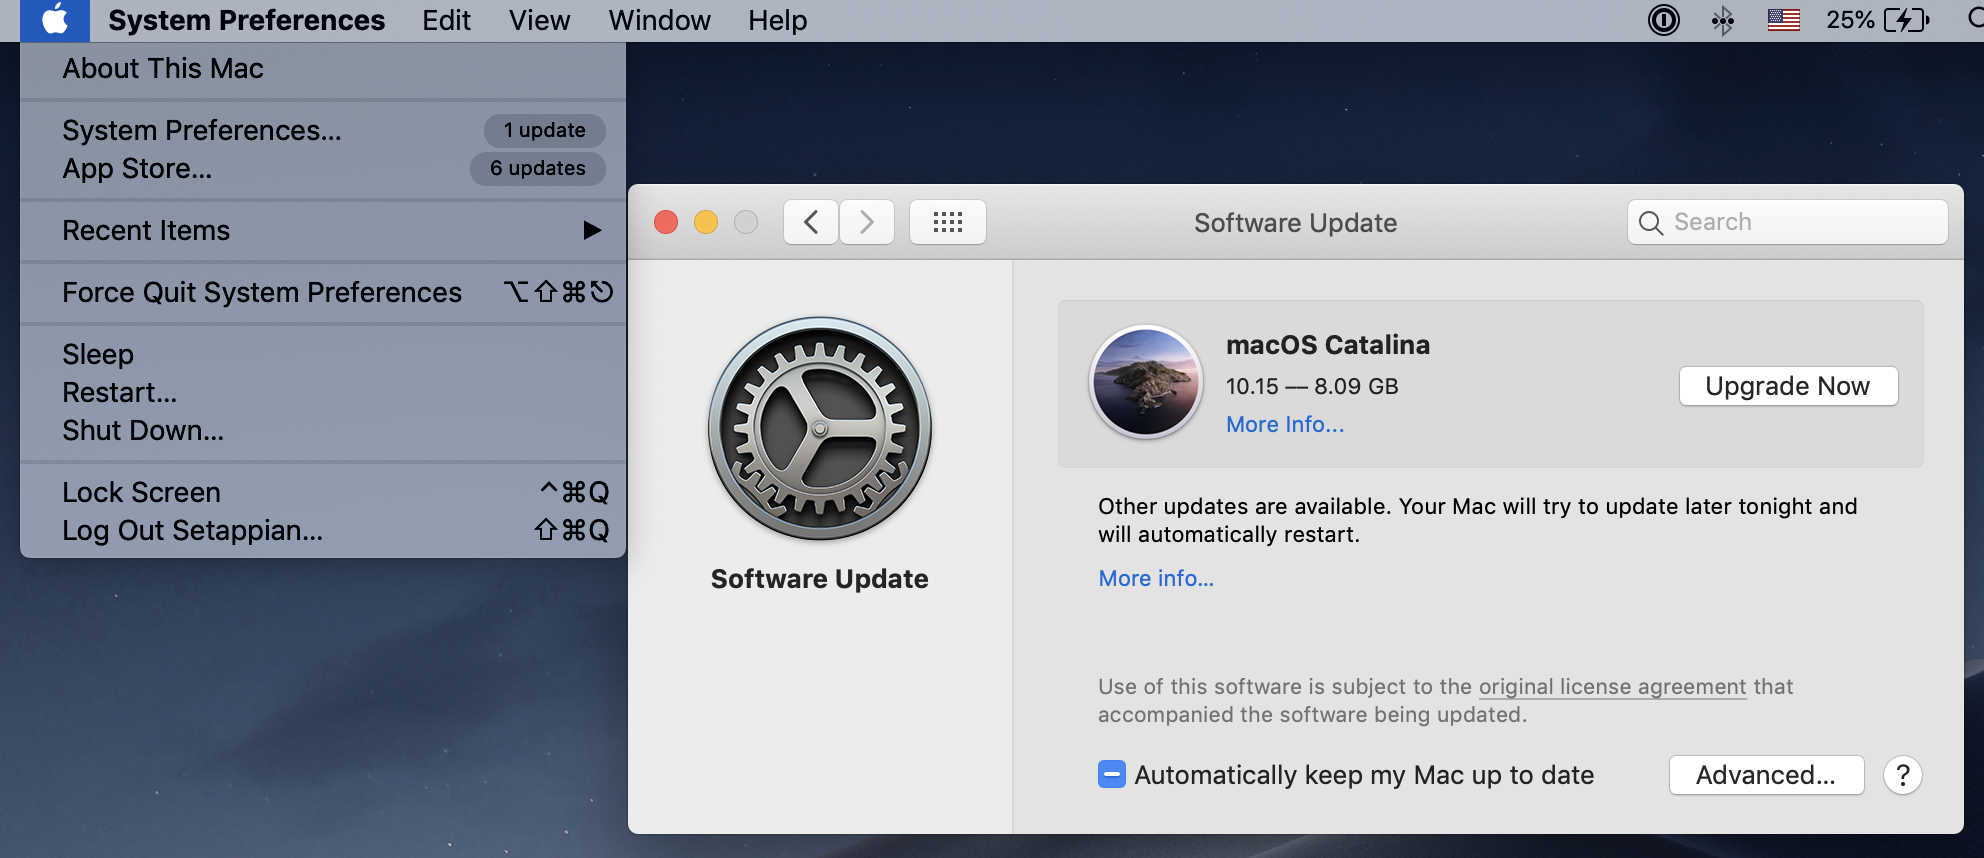 Why Does My Mac Not Notify Me About Software Updates